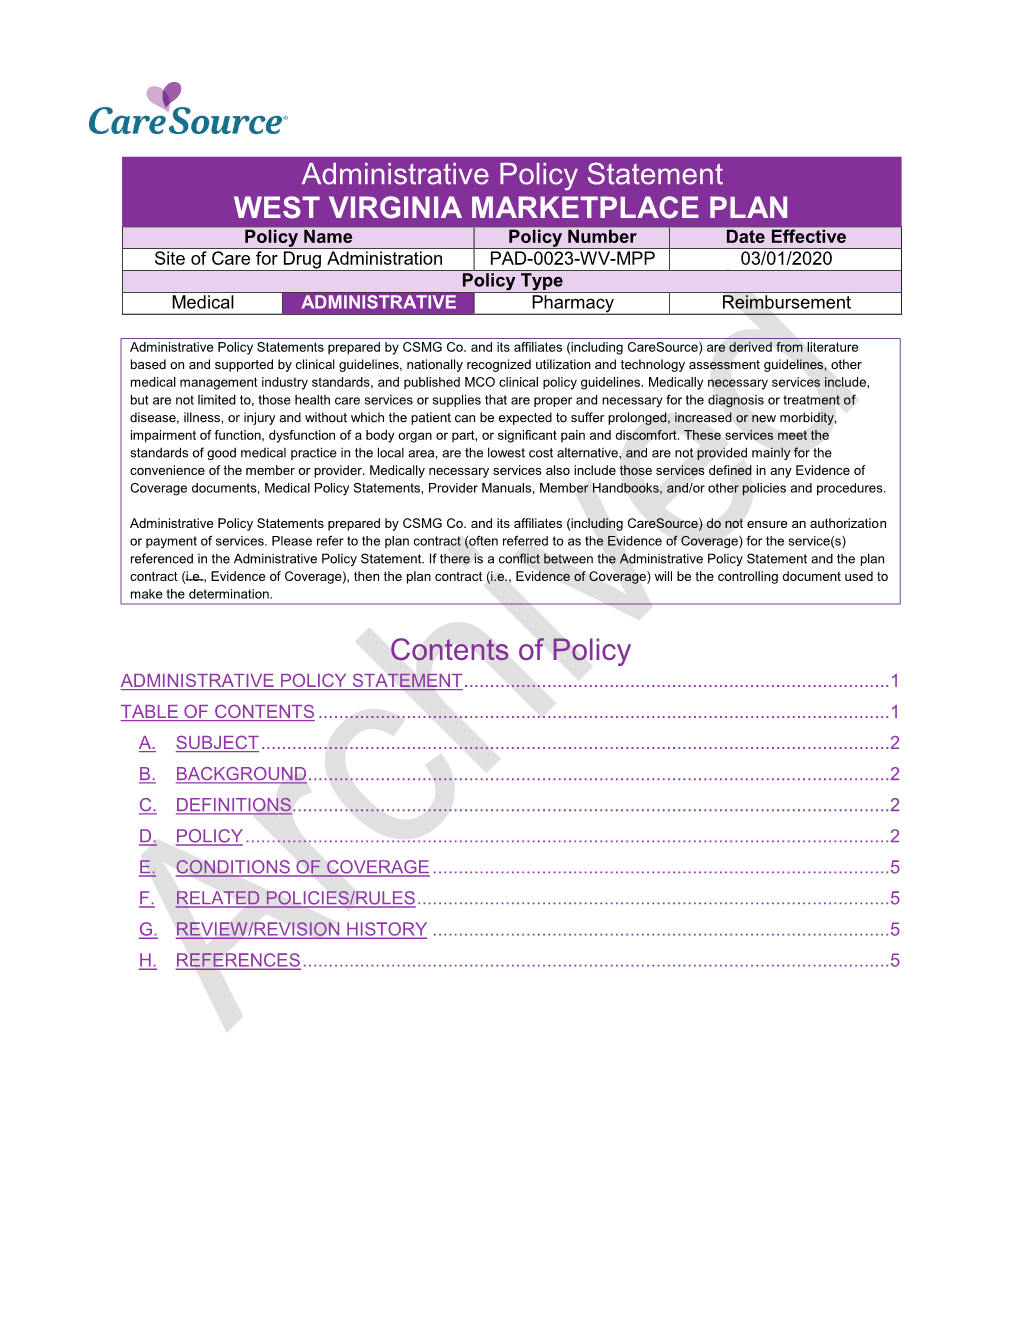 Administrative Policy Statement WEST VIRGINIA MARKETPLACE PLAN Contents of Policy